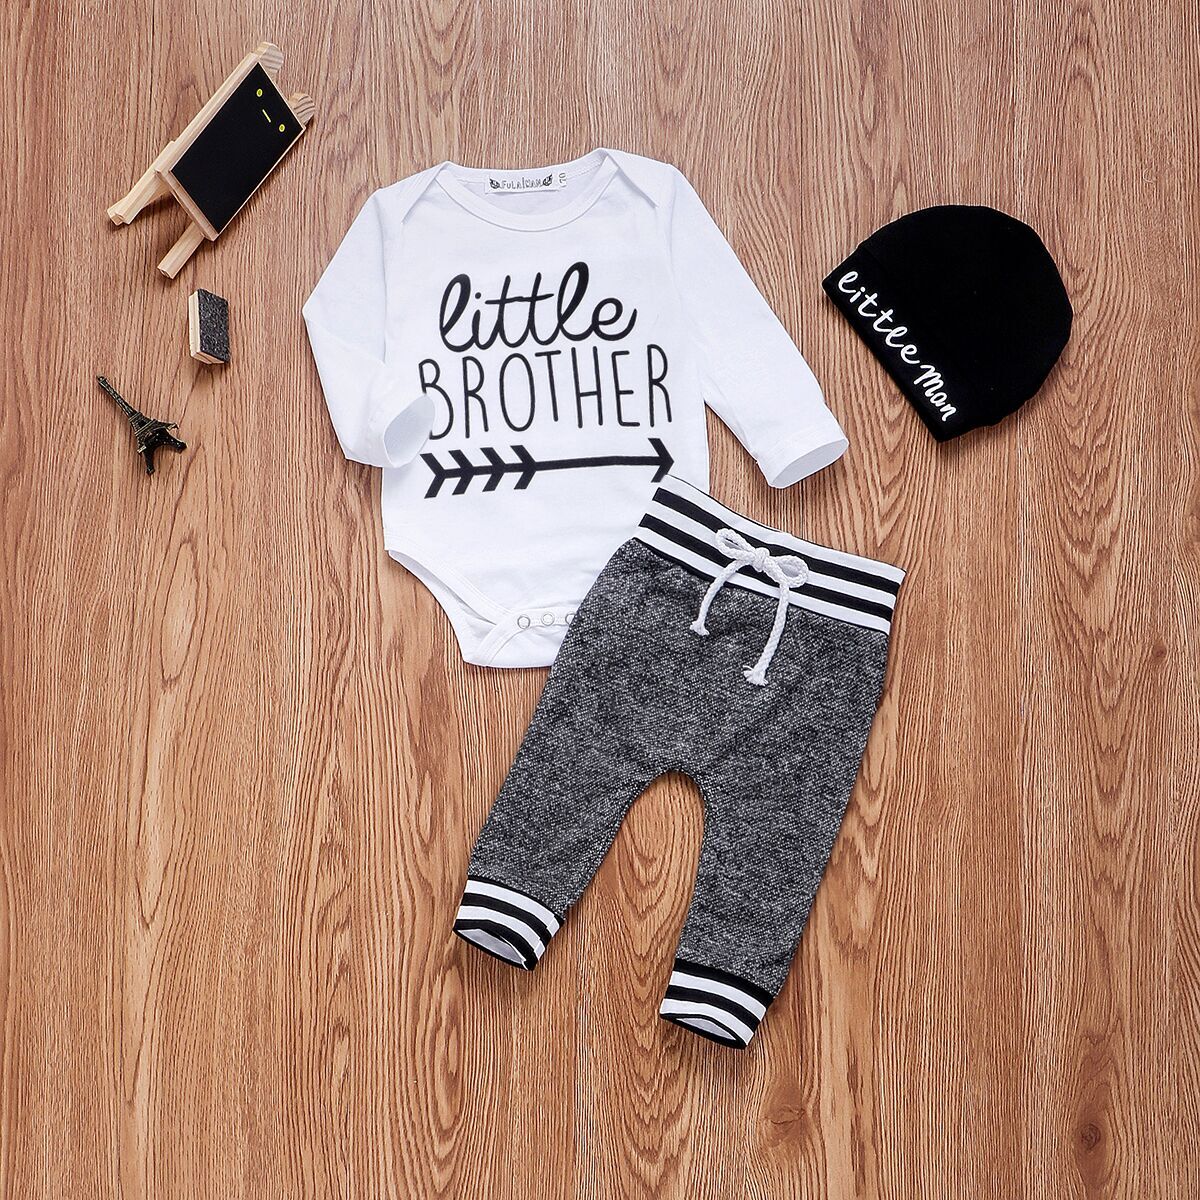 Newborn Infant Baby Boy Clothes Cotton Sets Long Sleeve Romper Pant Hats Outfit 3Pcs Baby Warm Clothing